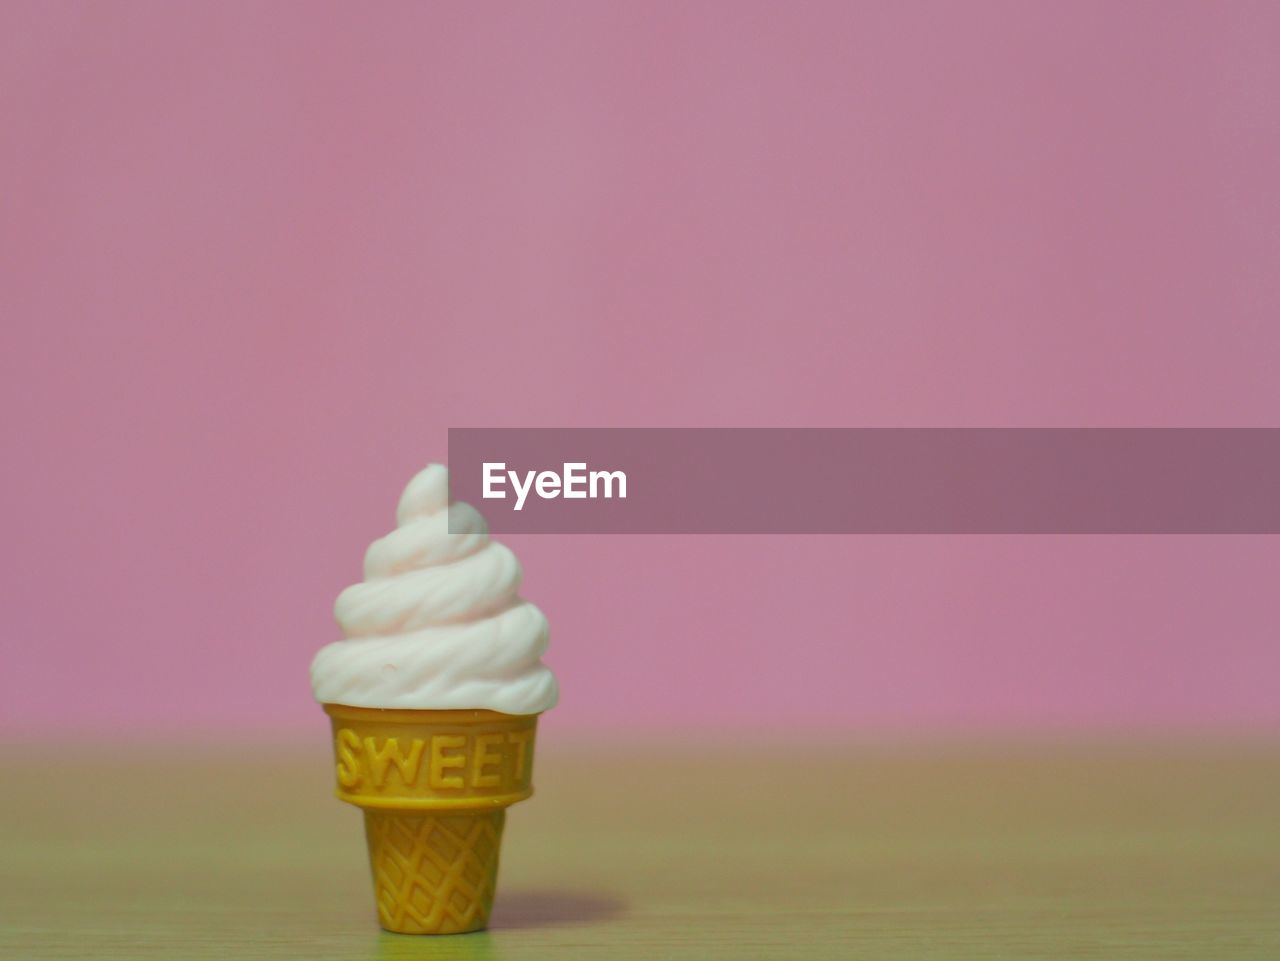 CLOSE-UP OF ICE CREAM CONE ON TABLE AGAINST WALL